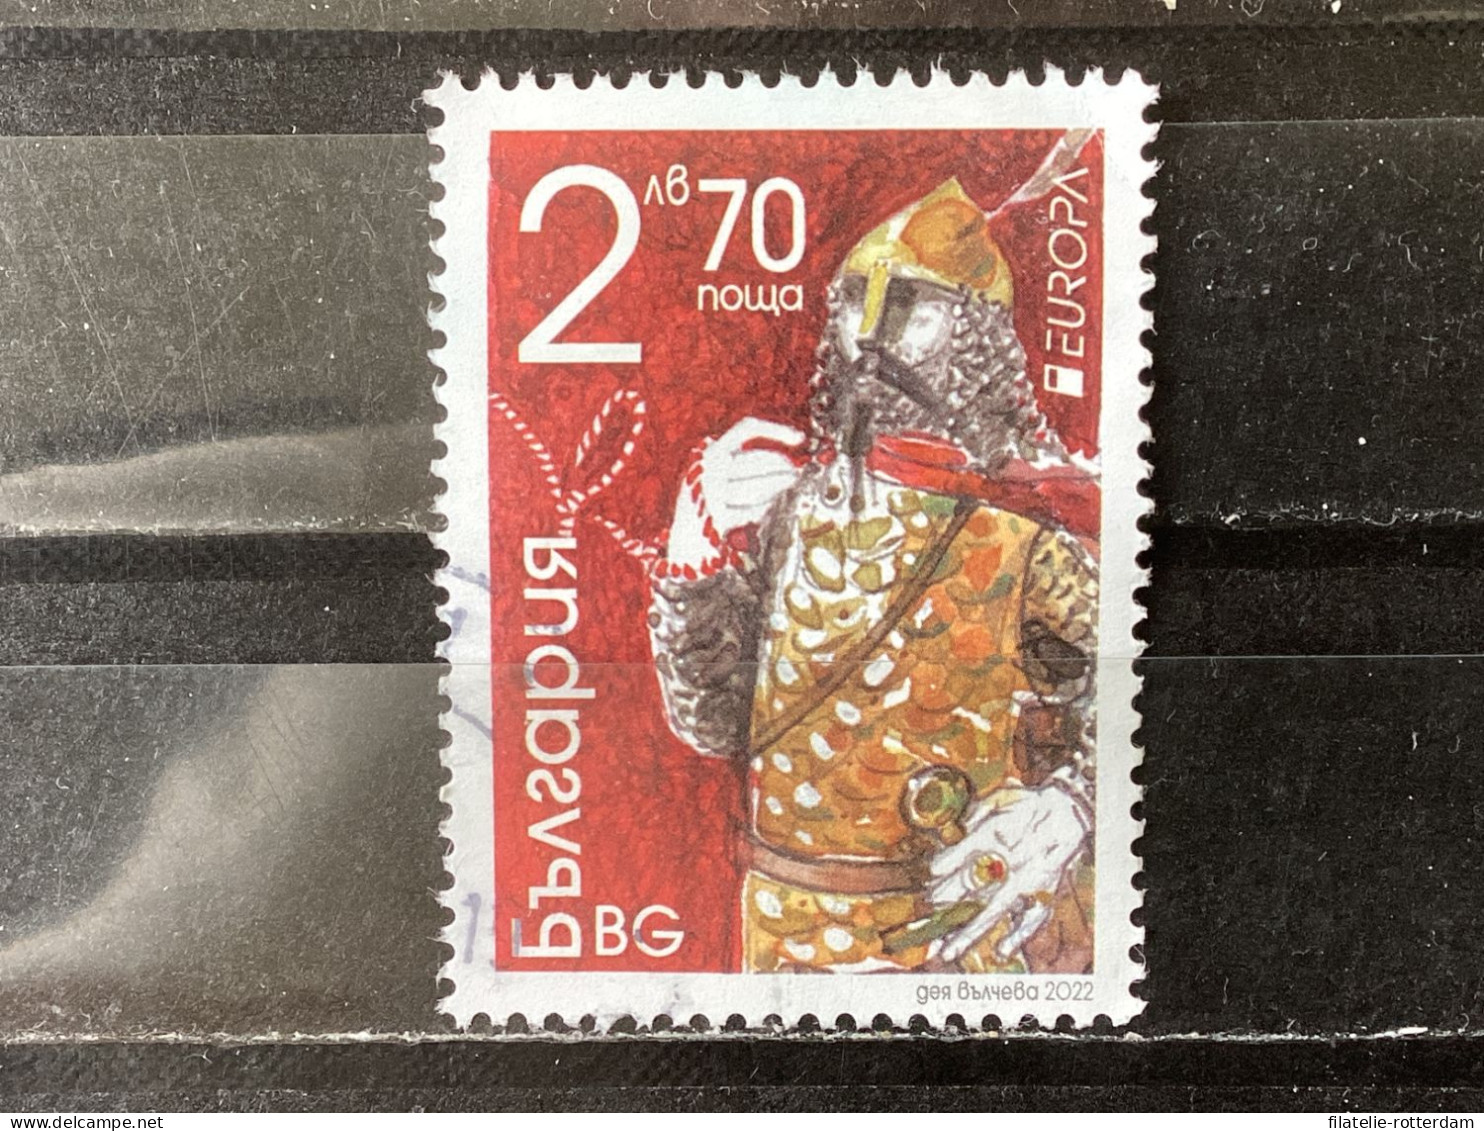 Bulgaria / Bulgarije - Europa, Stories And Myths (2.70) 2022 - Used Stamps